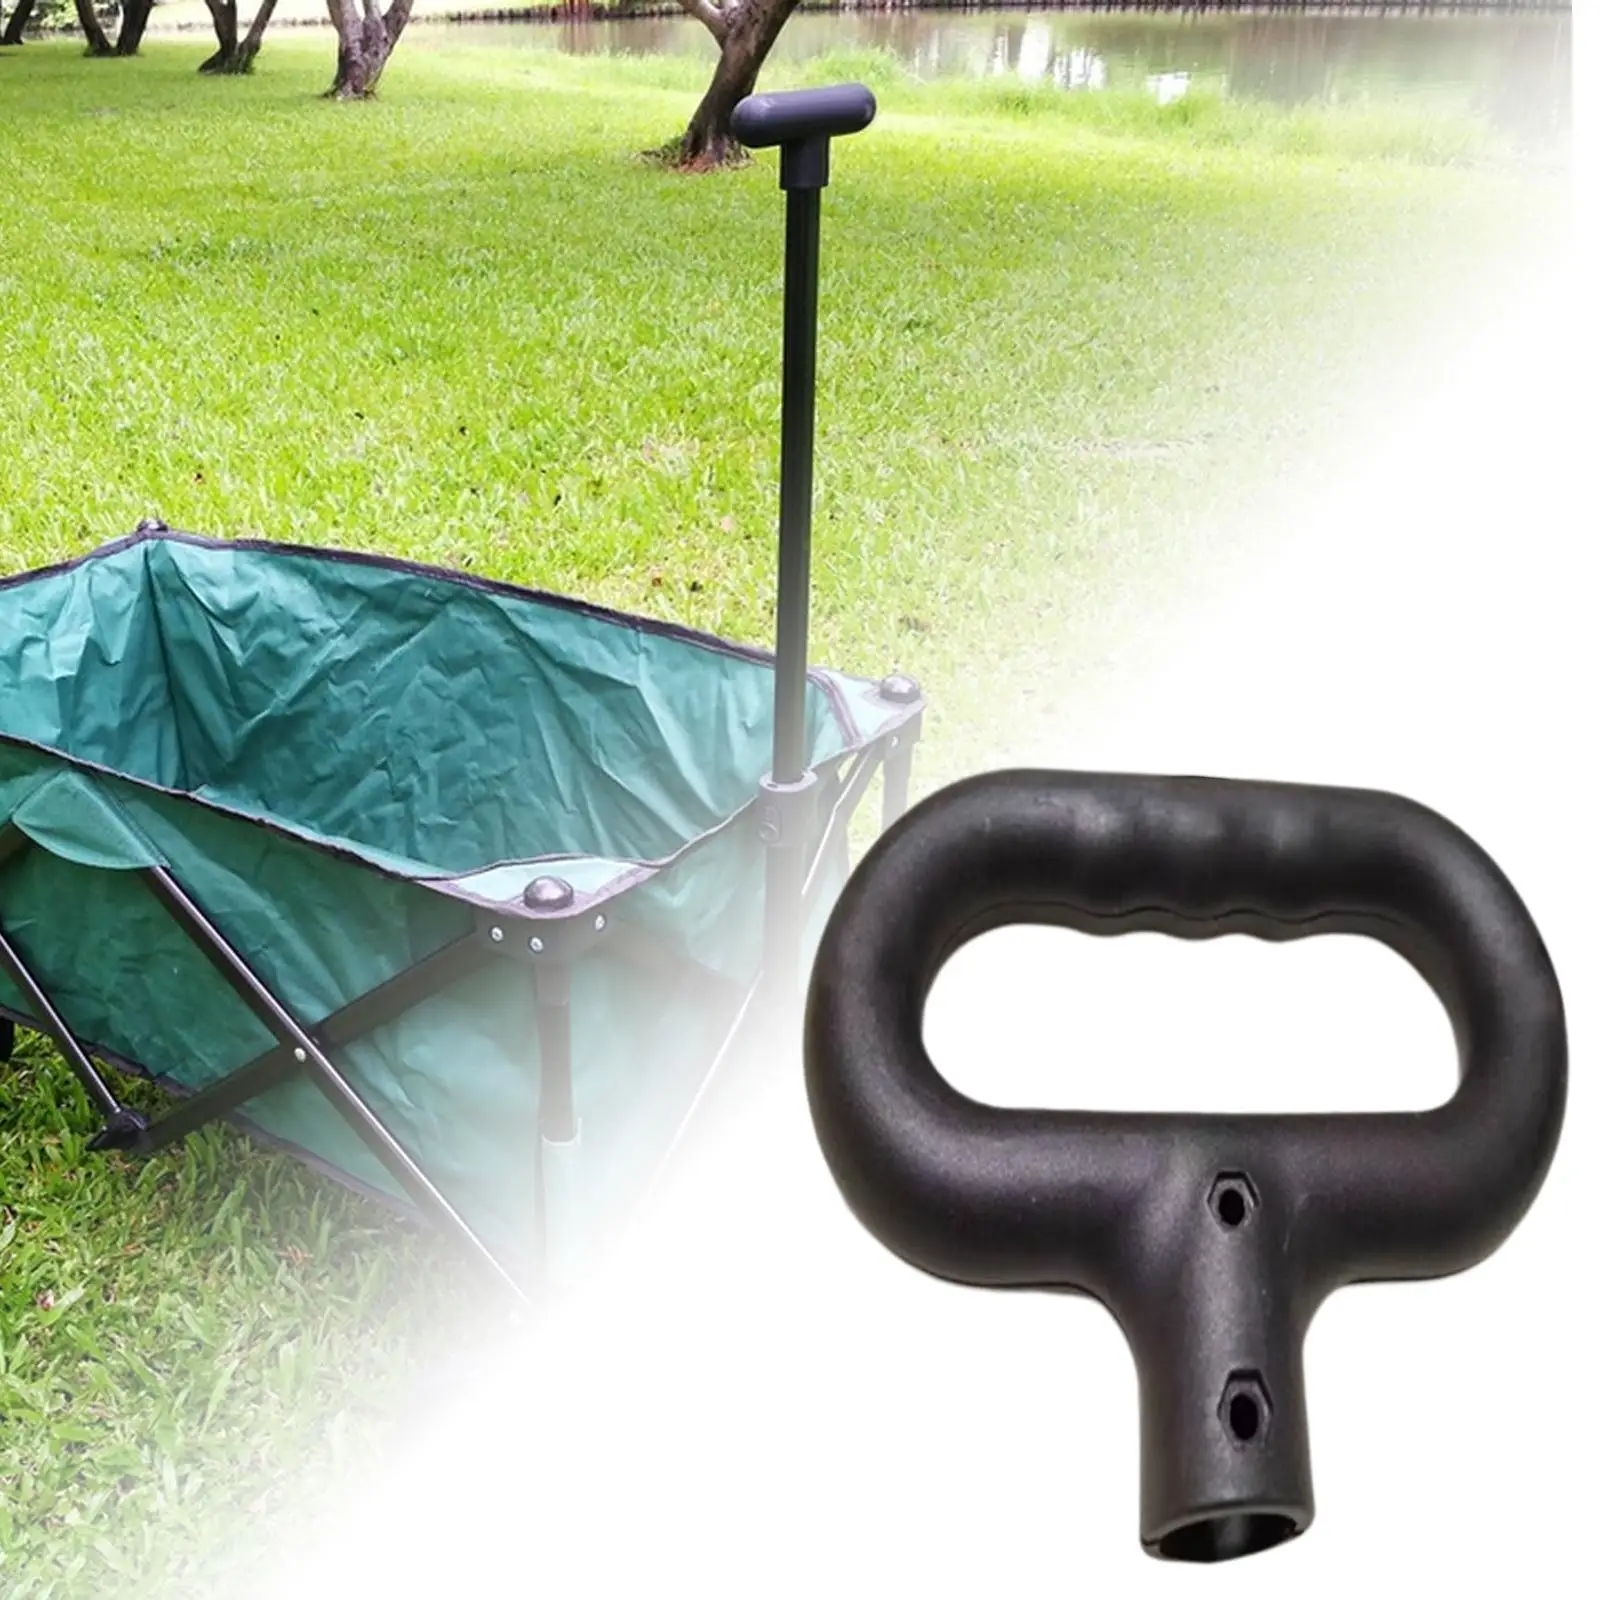 Wagon Cart Push Handle Lightweight Portable Hand Truck Handle for Garden Cart Camping Wagon Collapsible Wagon Cart Spare Part